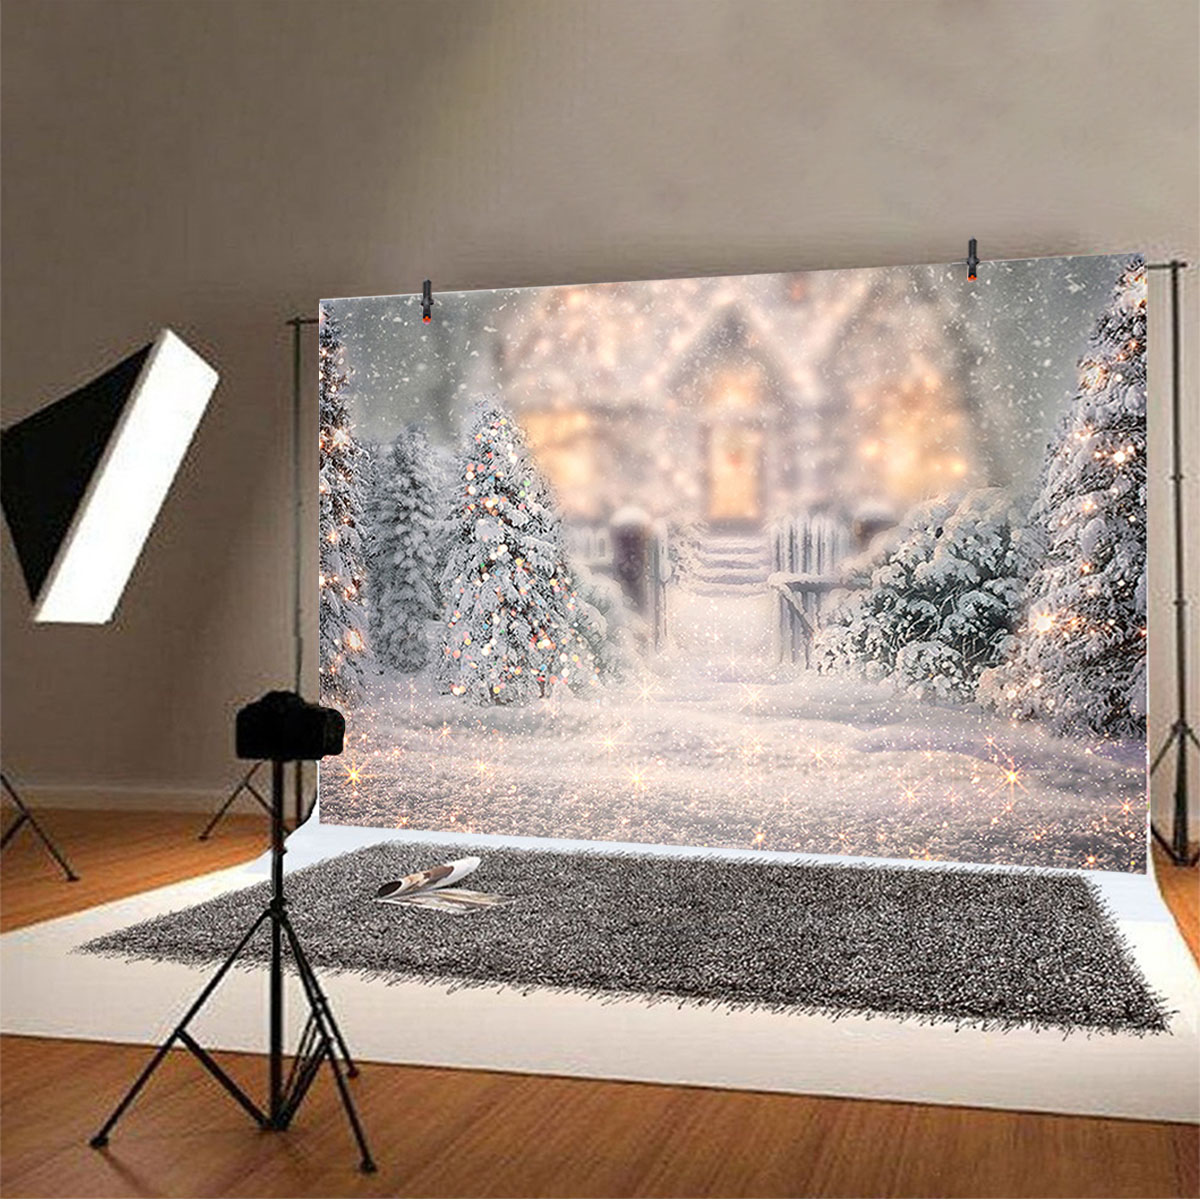 Find 5x3FT 7x5FT 8x6FT Christmas Tree Snow Photography Backdrop Background Studio Prop for Sale on Gipsybee.com with cryptocurrencies